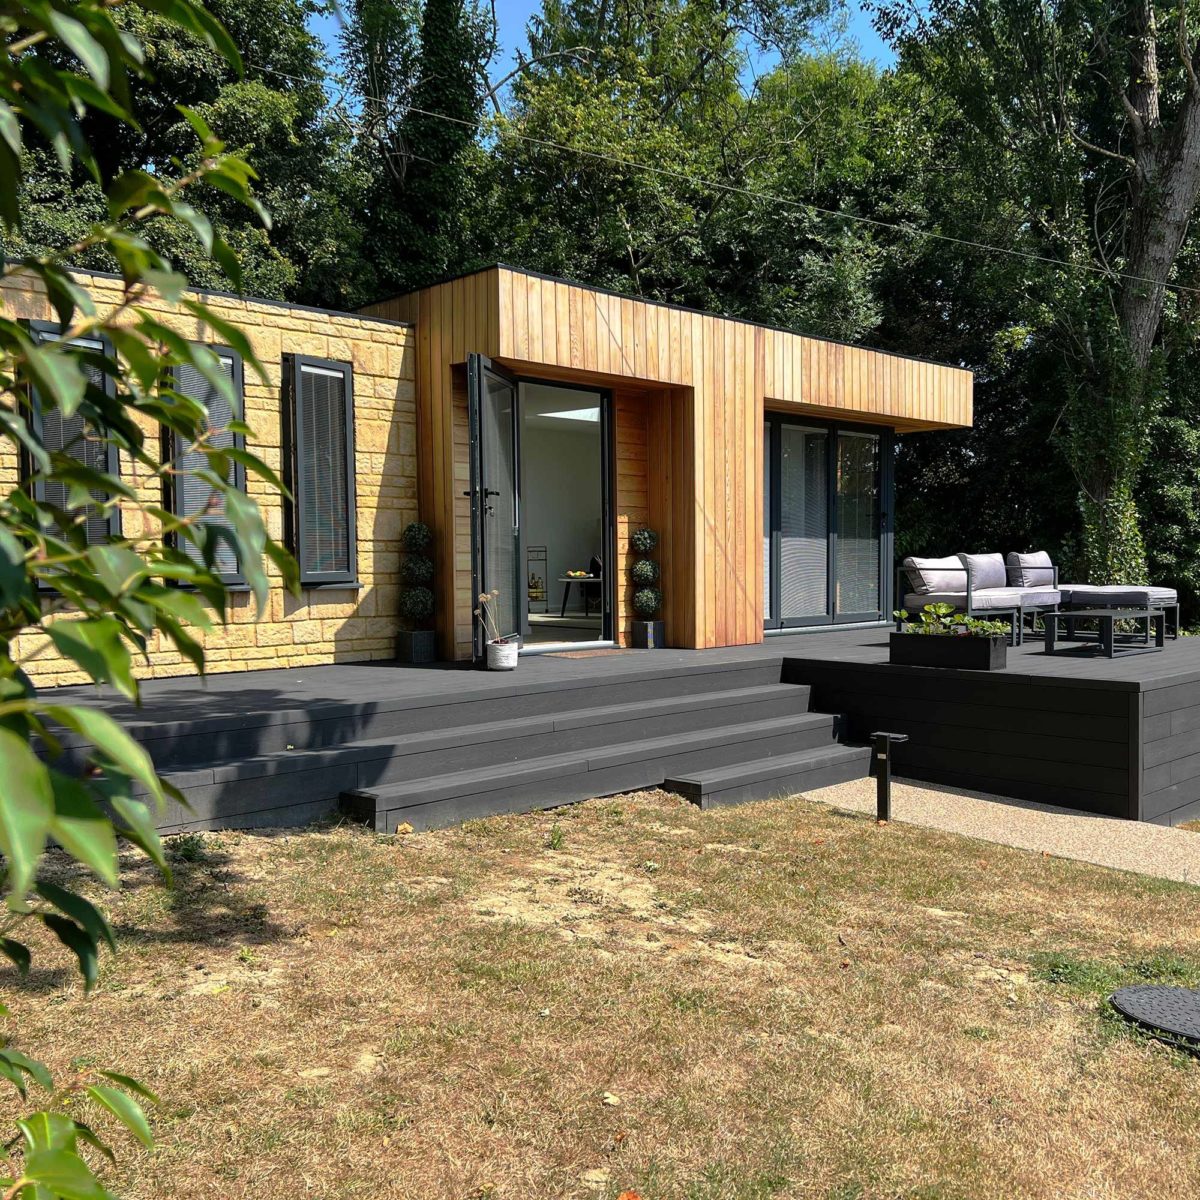 Designer mobile home with wood and stone cladding